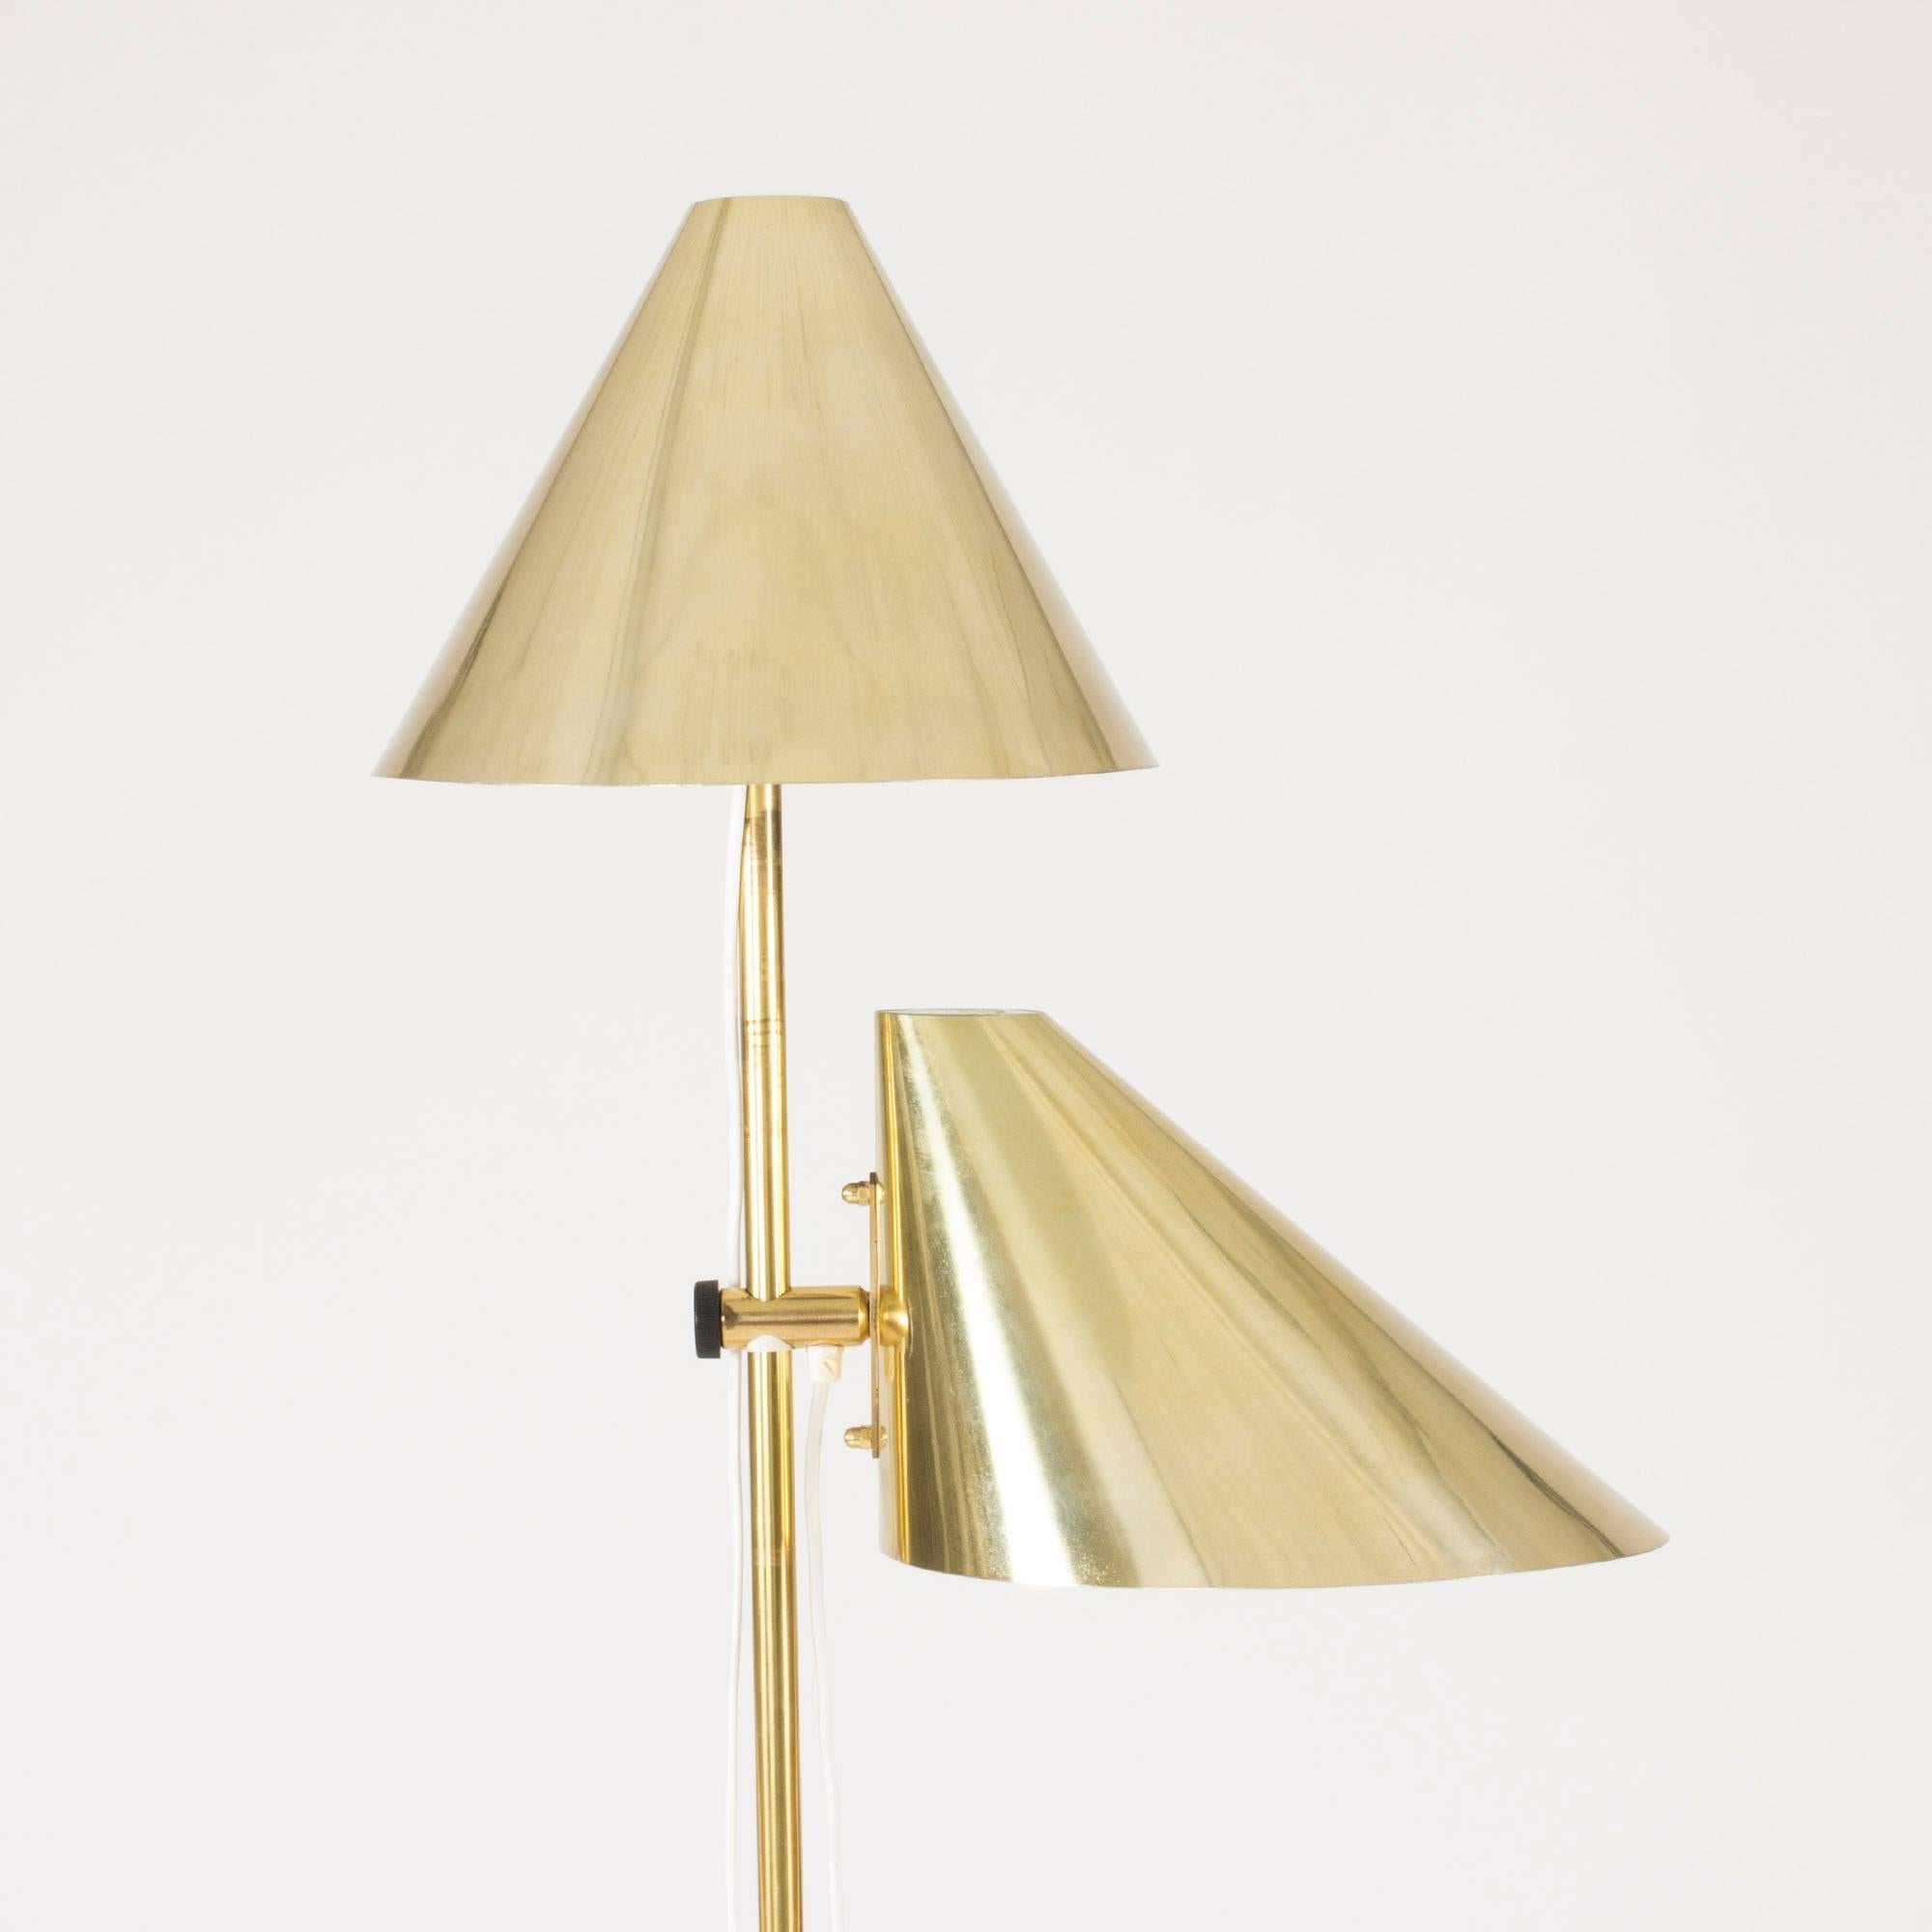 Oh so cool brass floor lamp by Hans Agne Jakobsson with two shades at different heights. The wiring runs along the lamp pole and is fastened to it with little black clamps. Heavy, wide brass base.